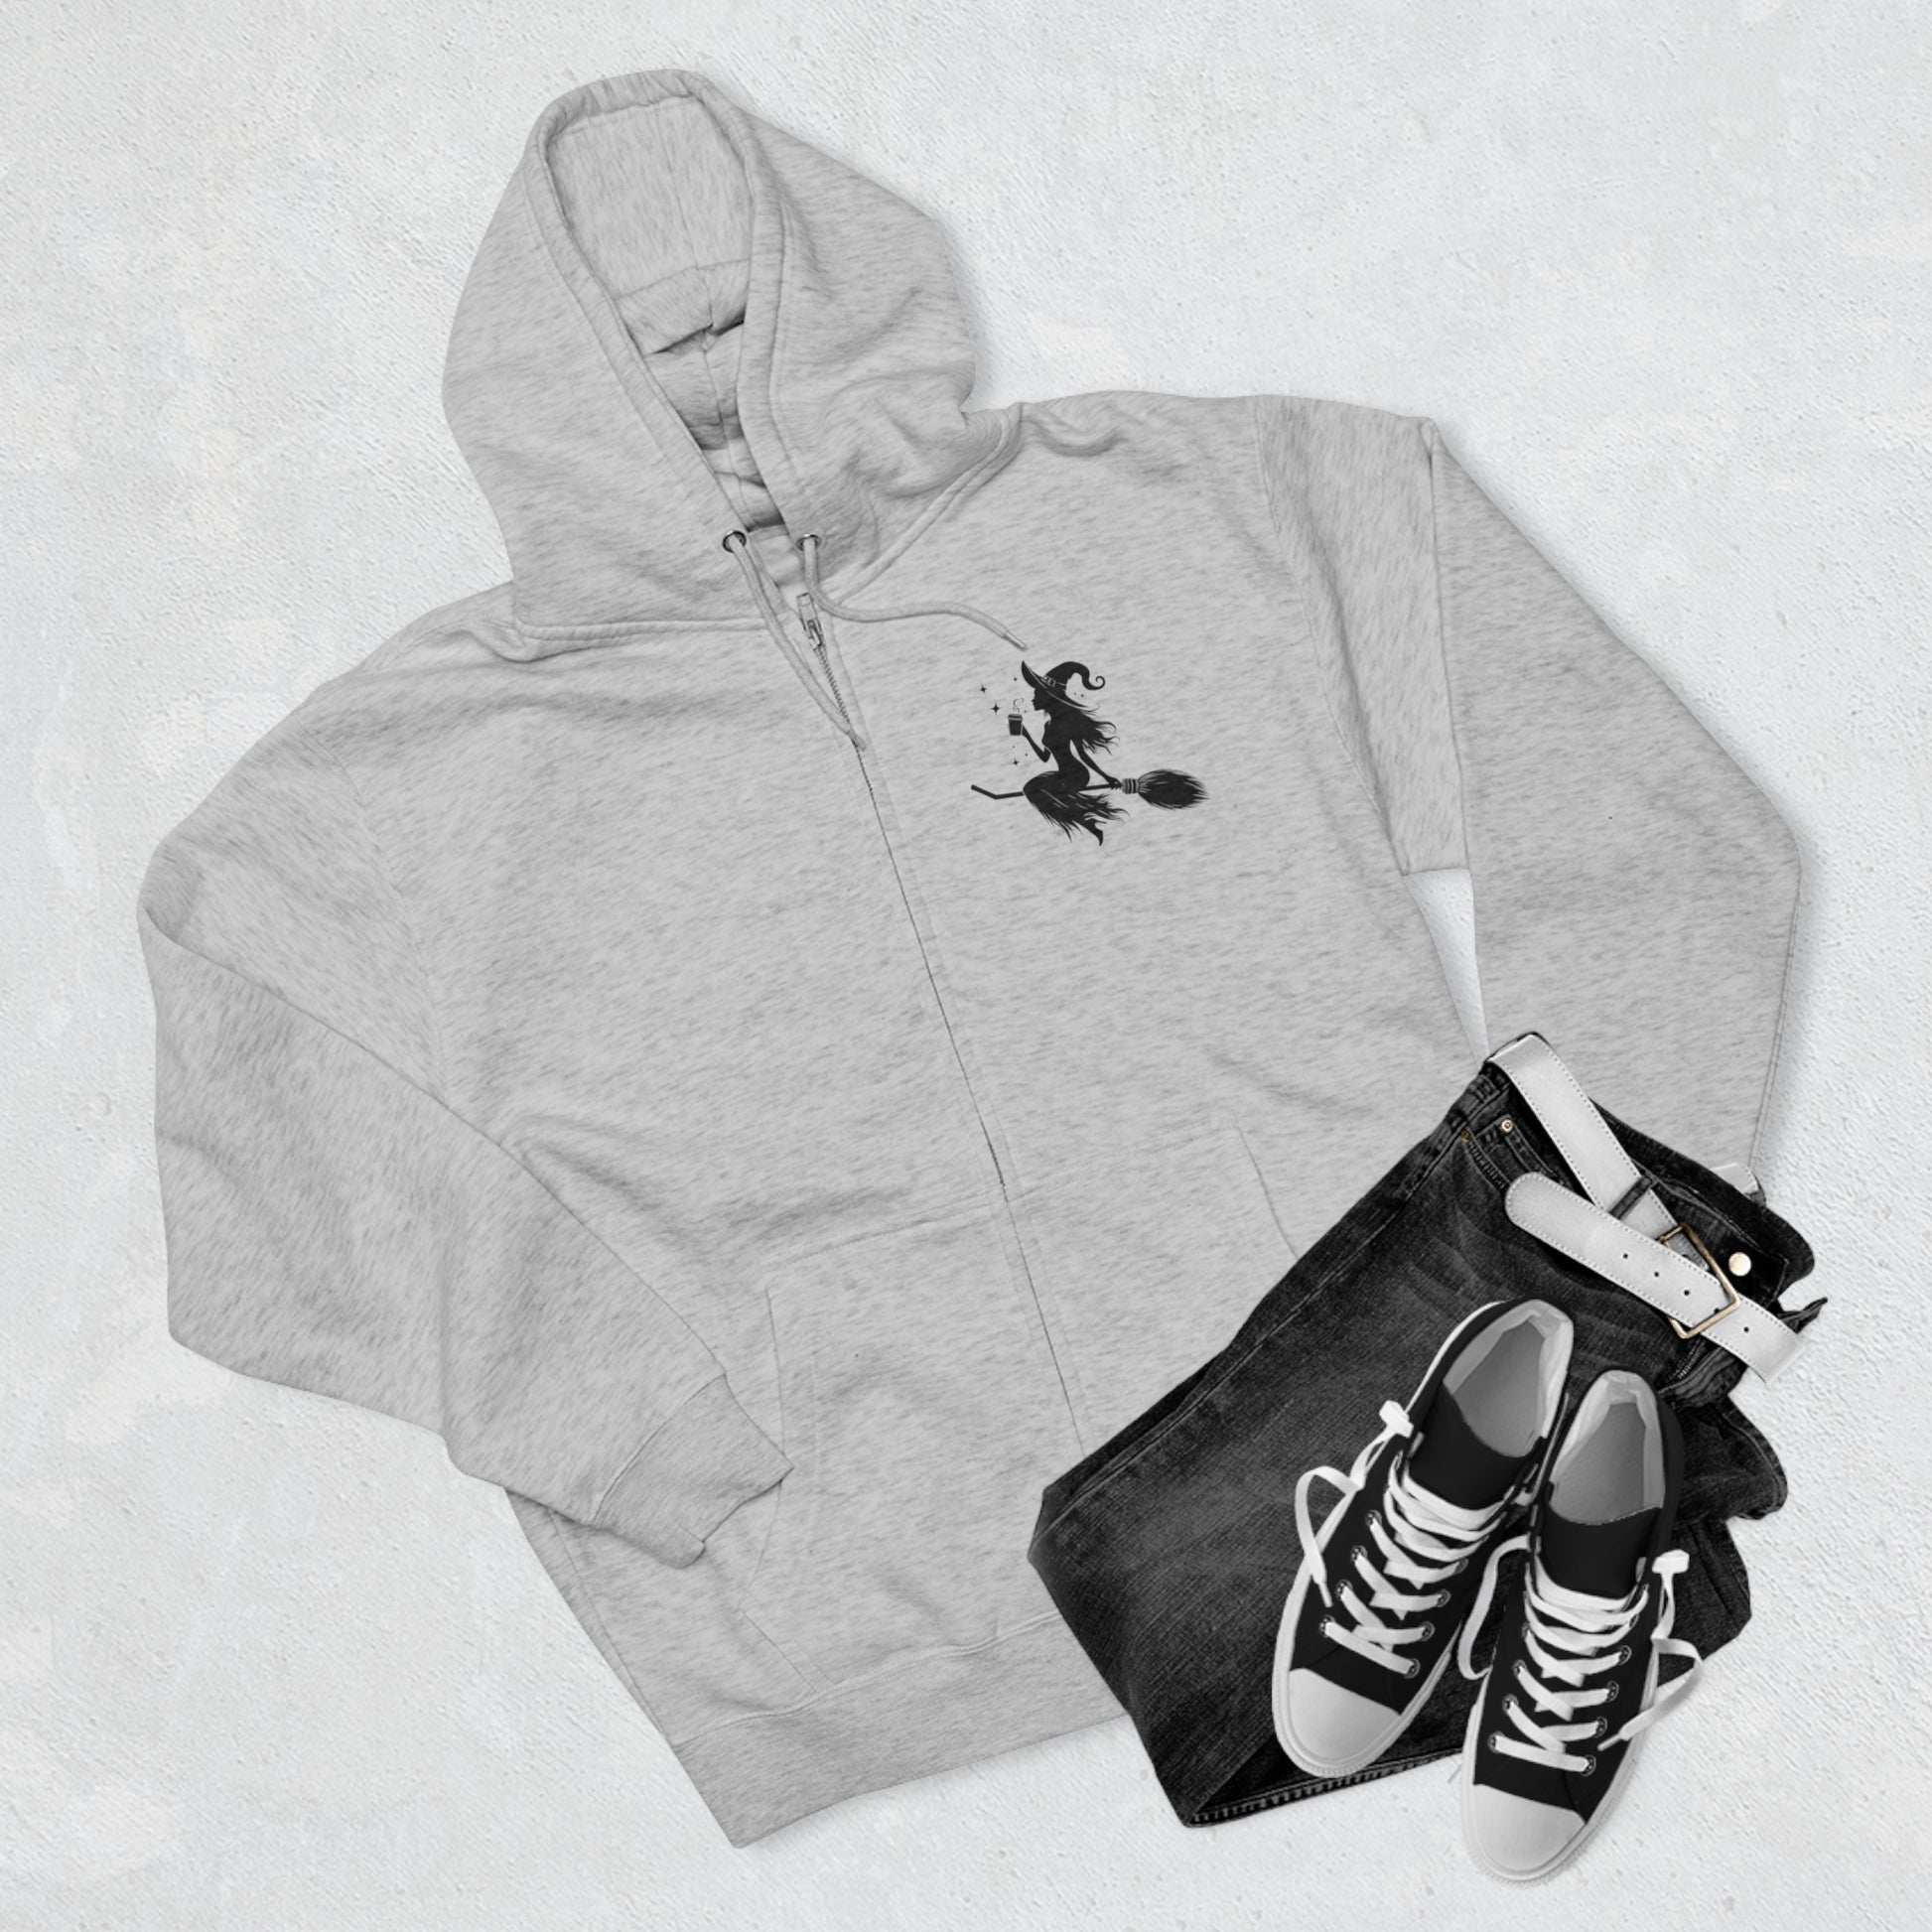 Hoodie: featuring a witch flying with a coffee cup, with a moon in the background. Gray color Hoodie with Black graphics on the front chest,  and back.